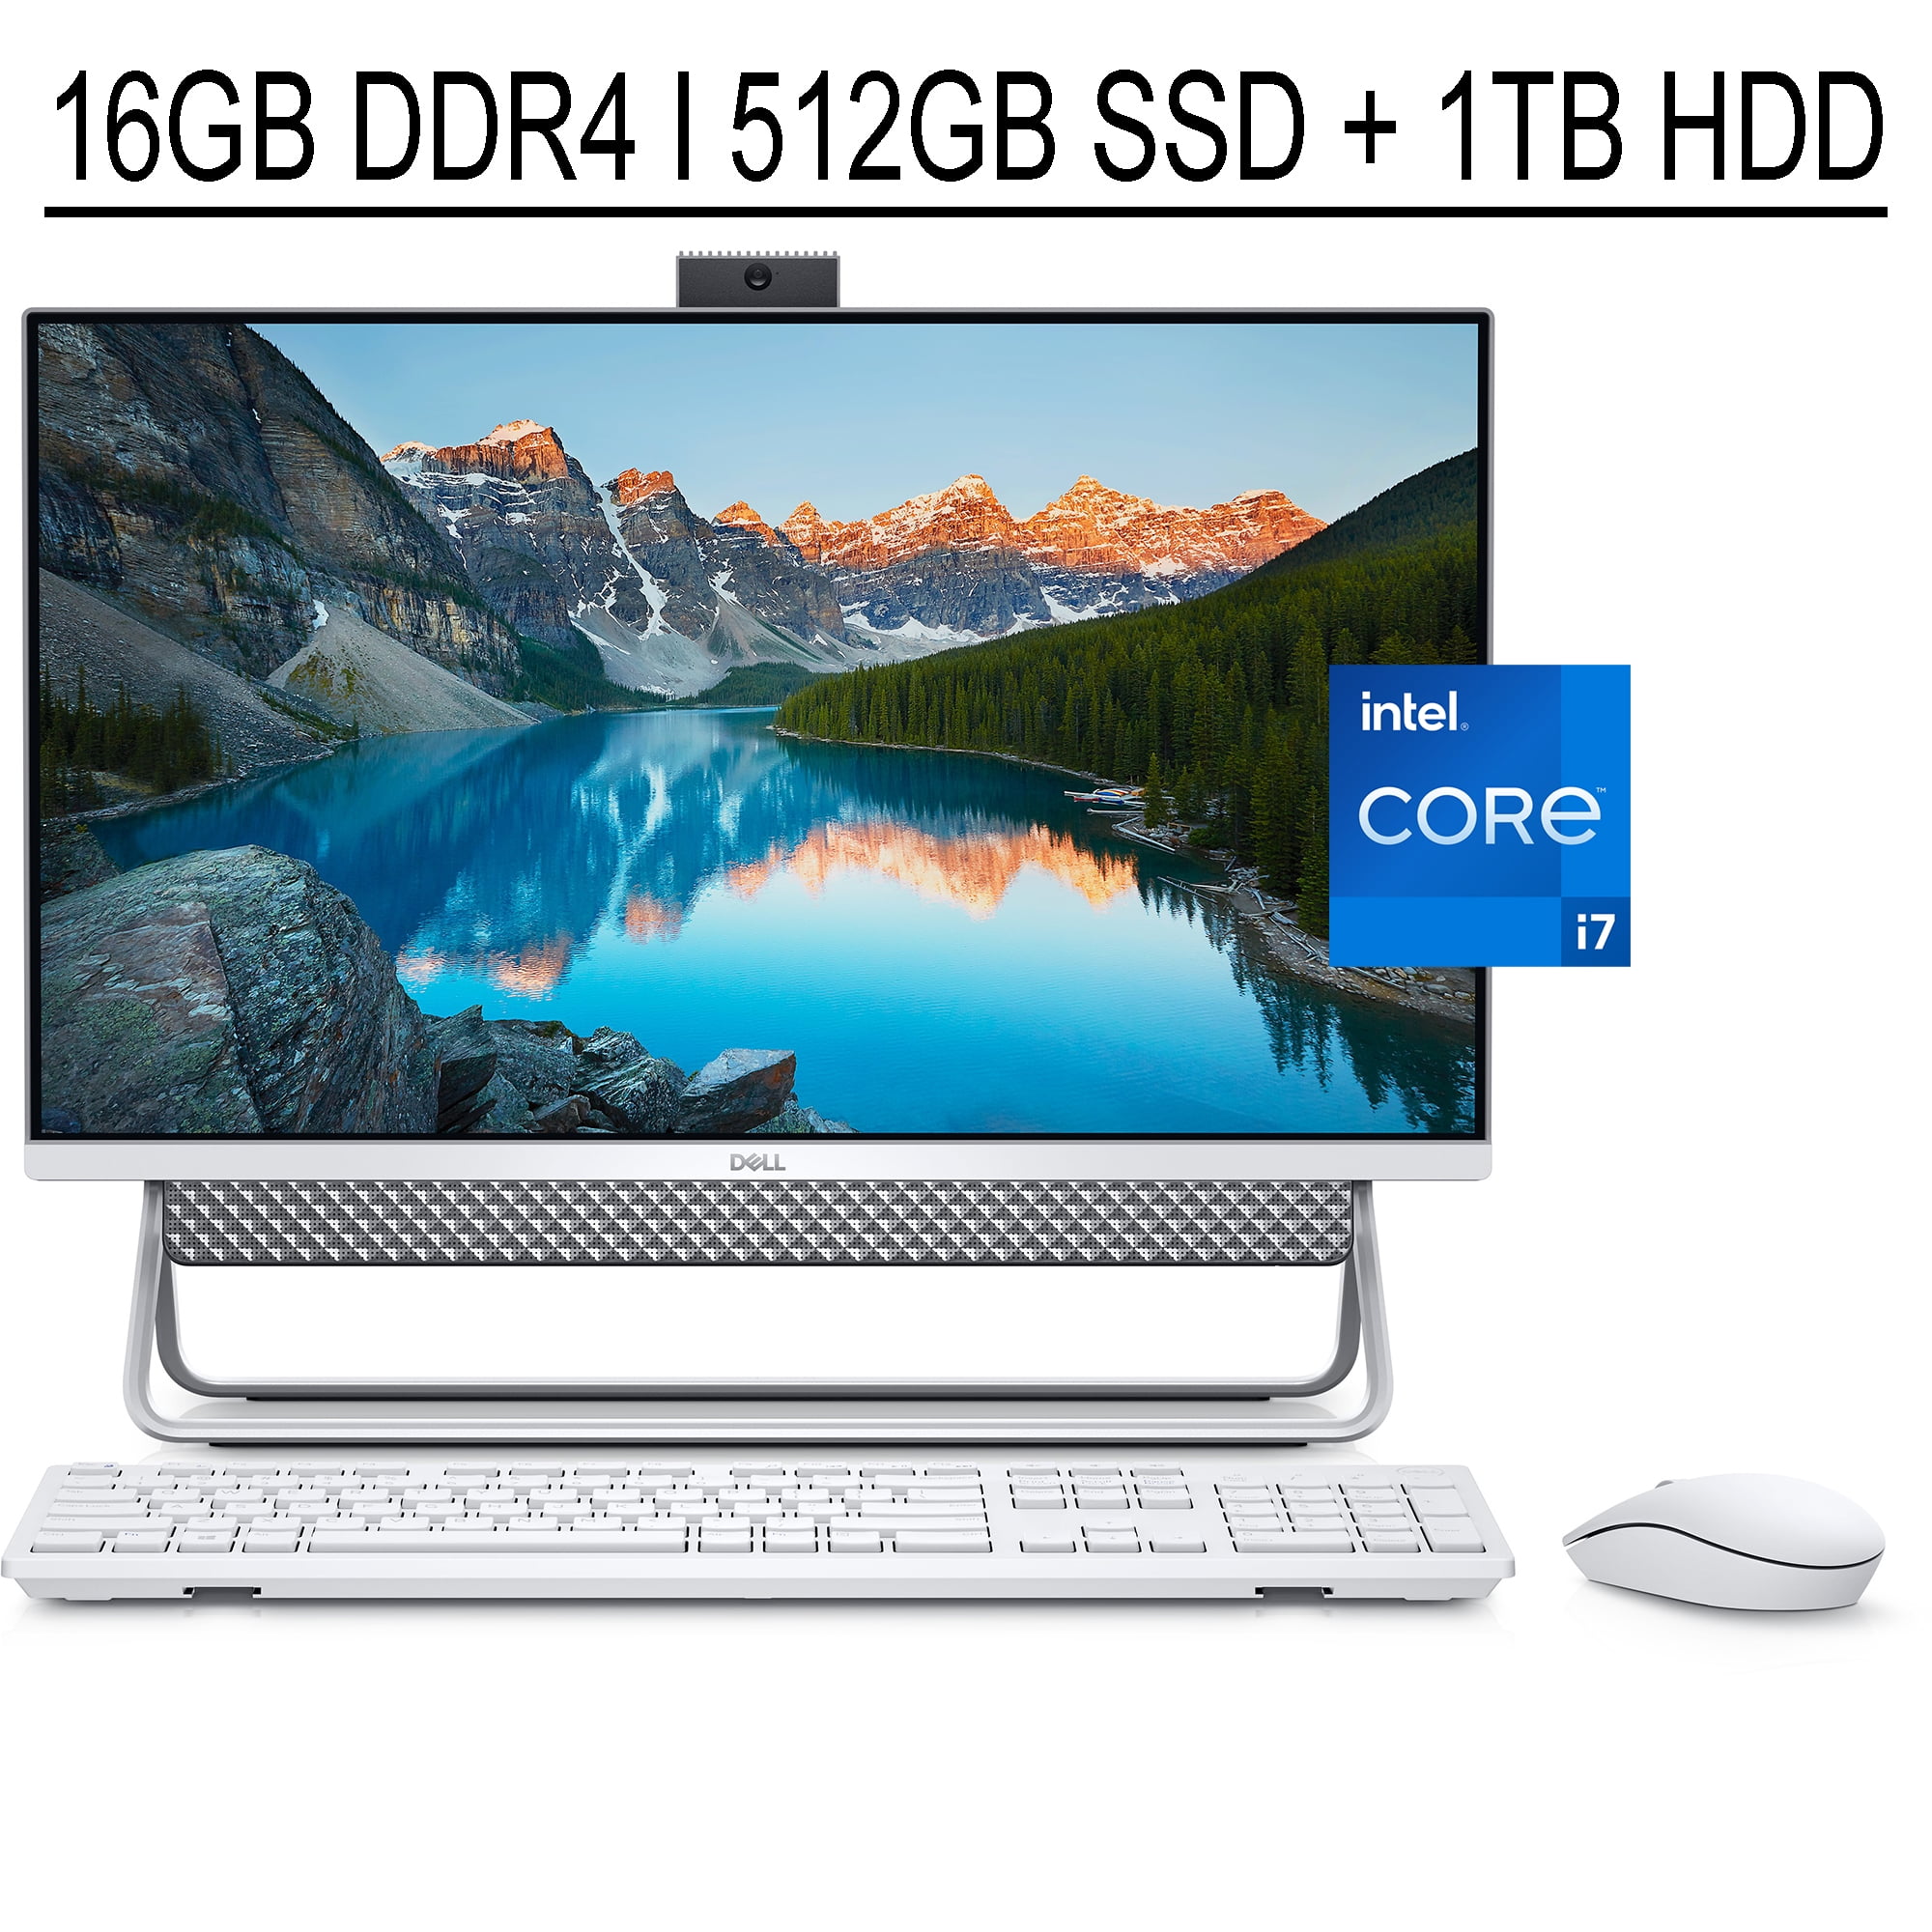 Dell Inspiron 27 7000 Business All-In-One Desktop 27 FHD Infinity  Touchscreen 11th Gen Intel Quad-Core i7-1165G7 16GB DDR4 512GB SSD 1TB HDD  GeForce ...